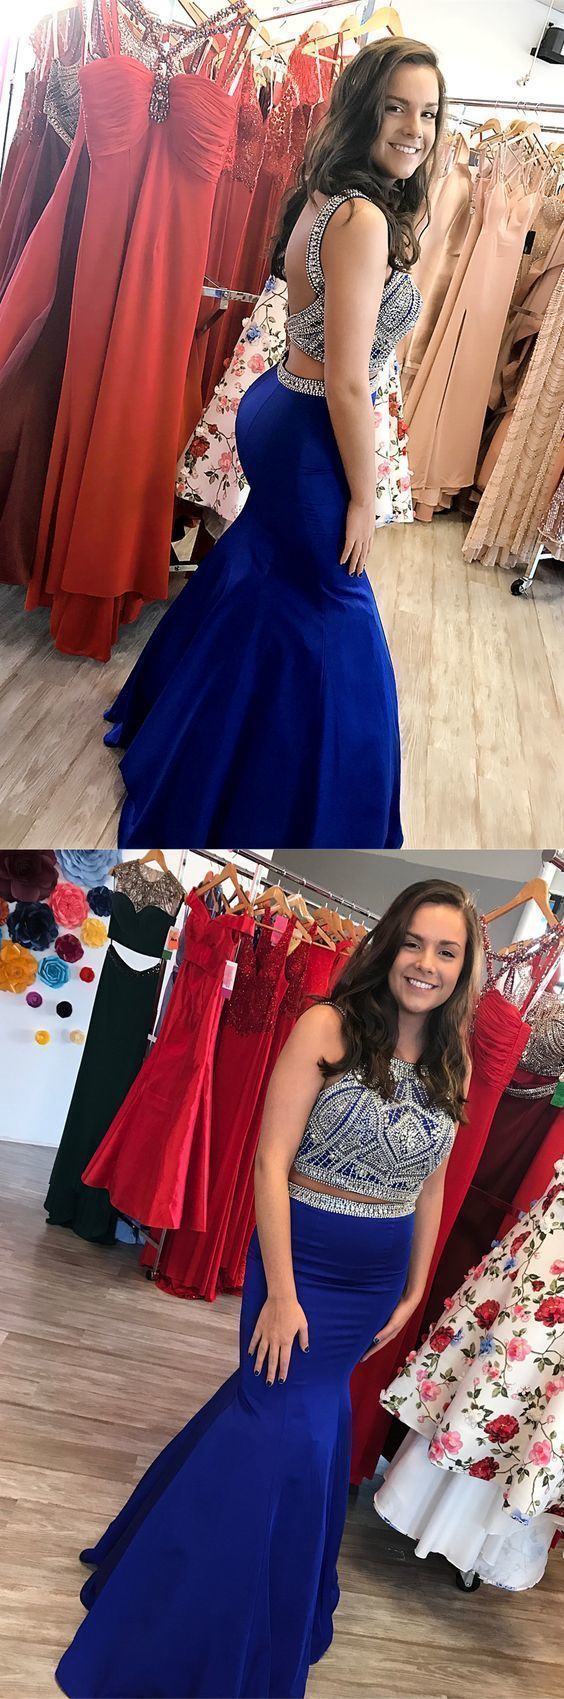 Sparkly Beaded Two Piece Prom Dresses, Royal Blue Satin Evening Party Gowns   cg11534